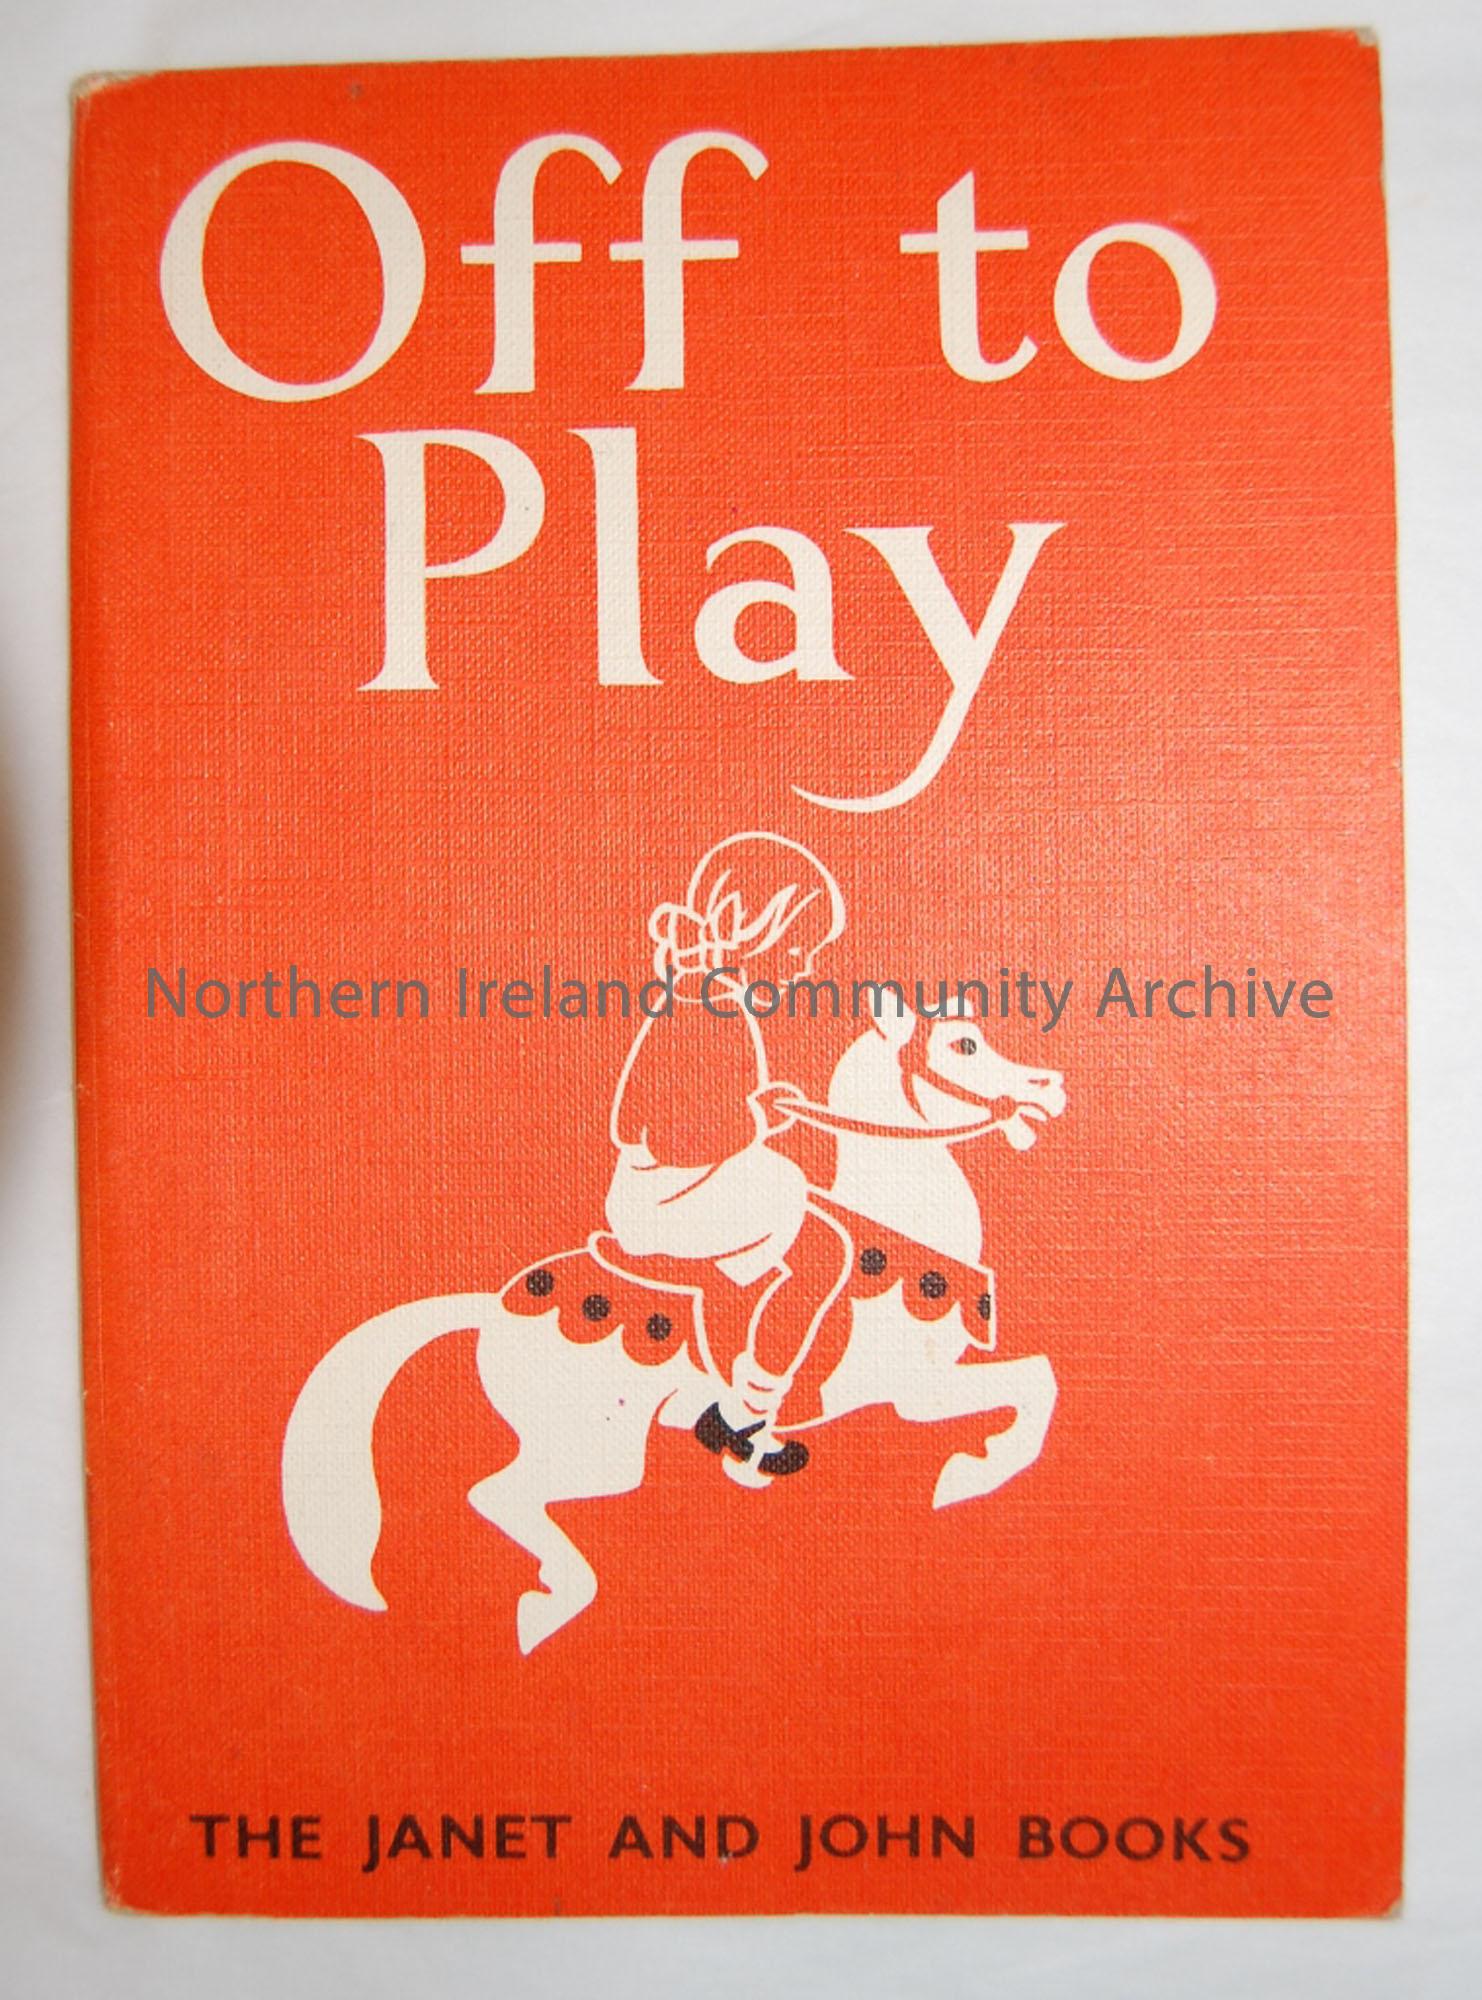 By O’Donnell and Munro, published by Nisbet & Co. Ltd, 1949. Orange cover.